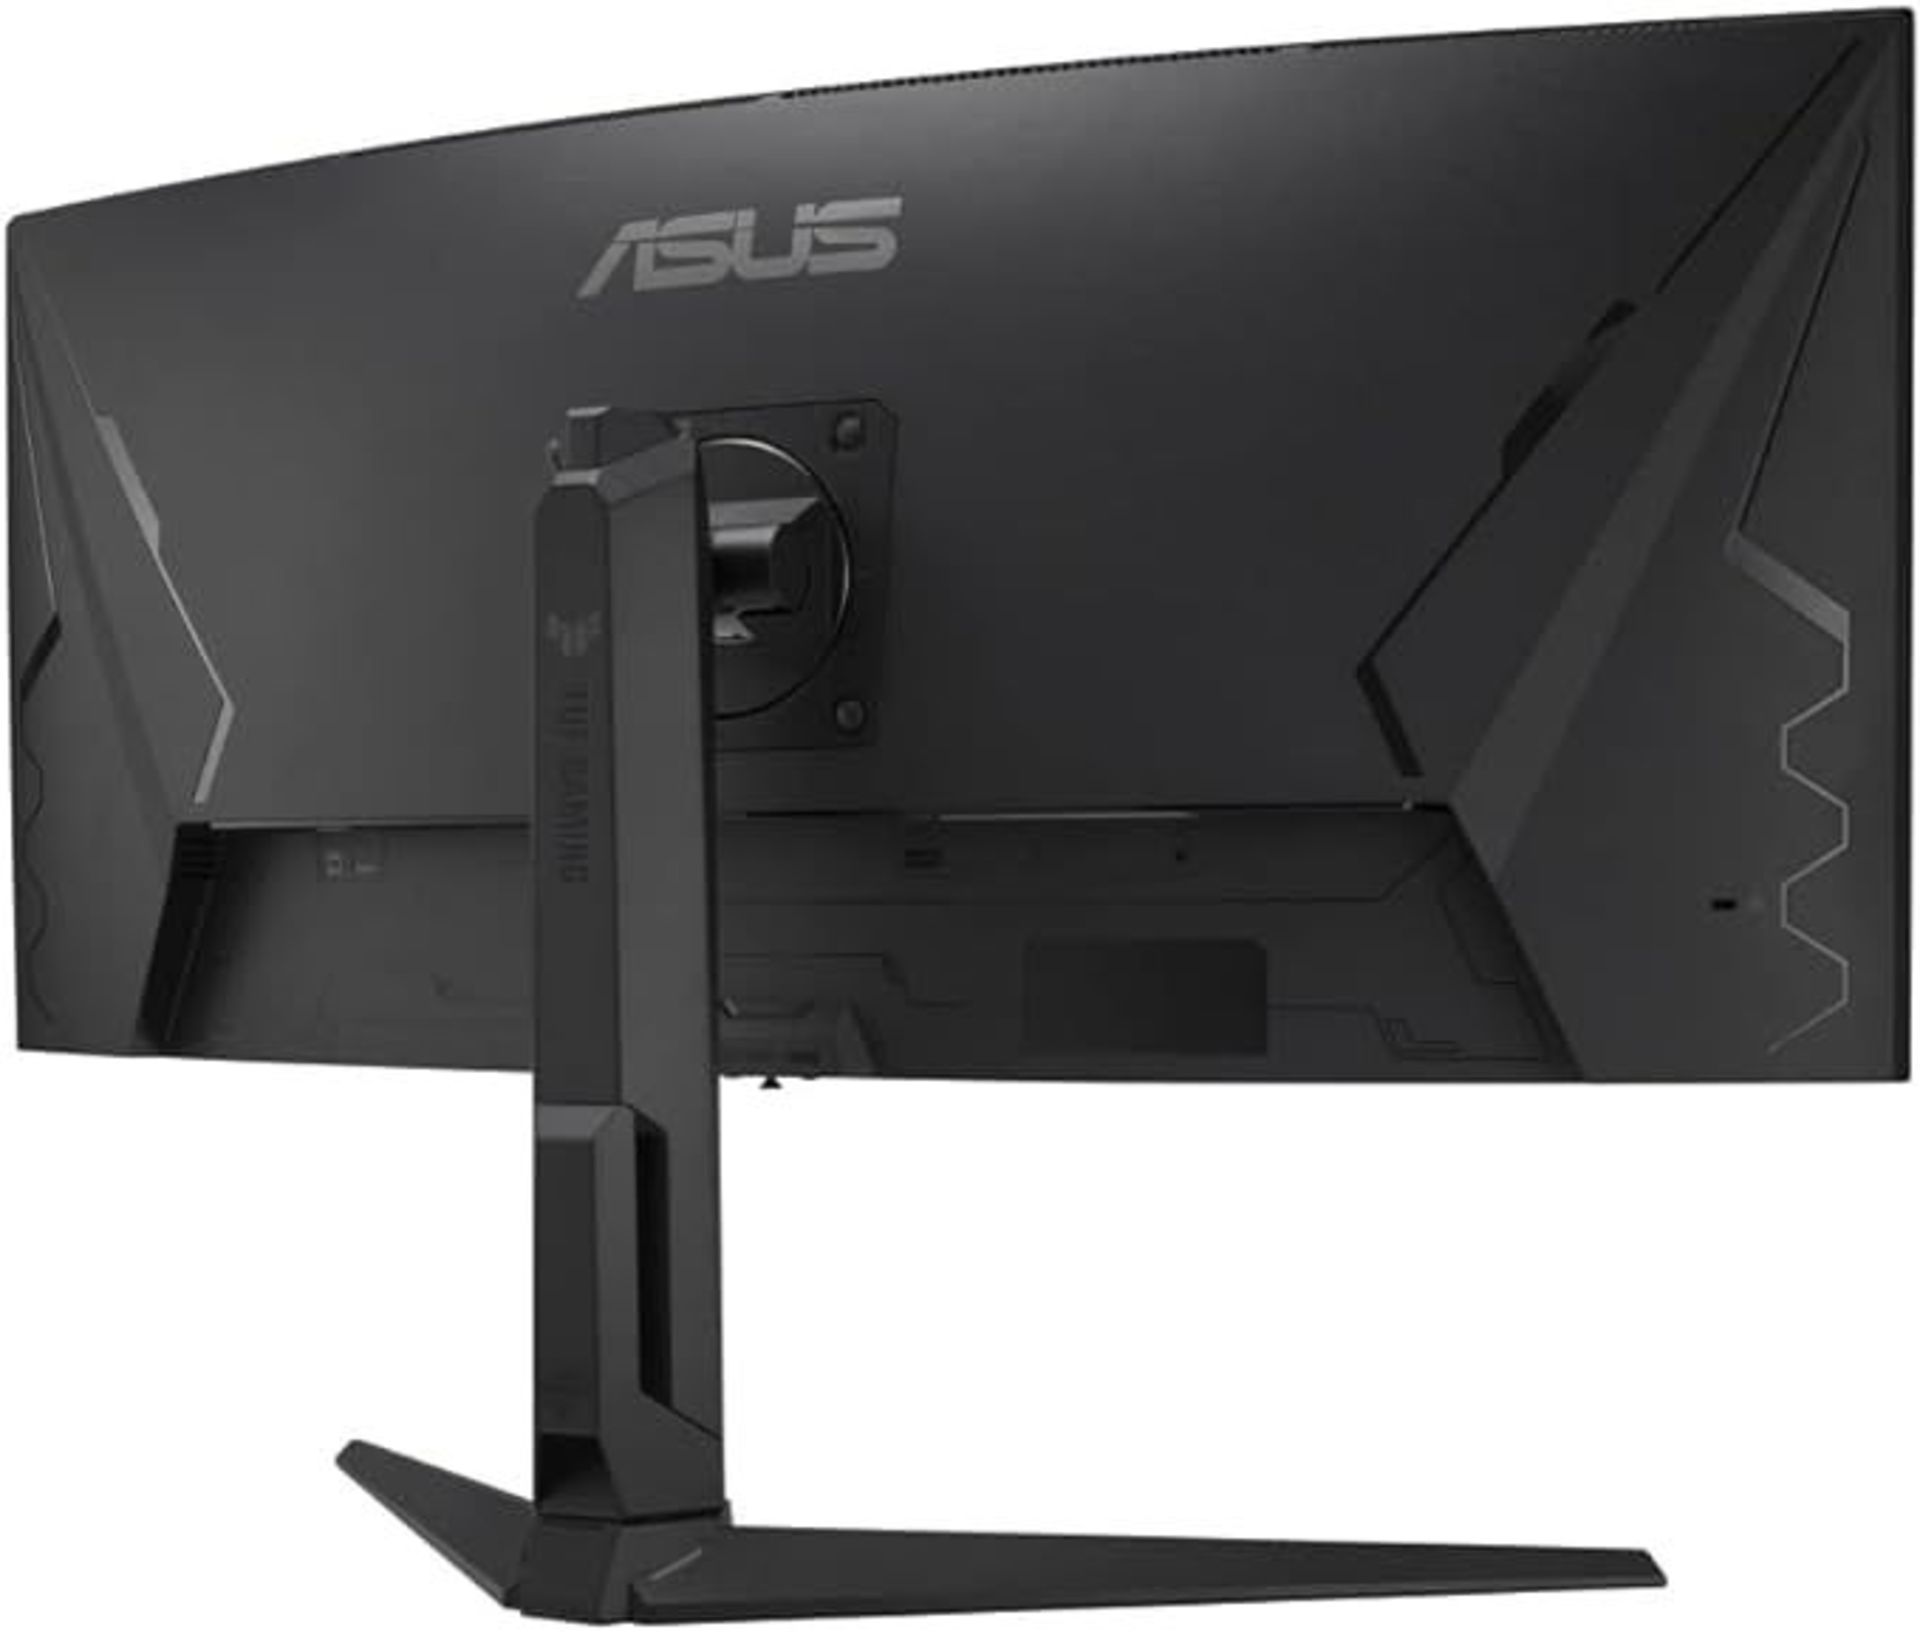 ASUS TUF Gaming VG34VQEL1A Curved Gaming Monitor – 34 inch UWQHD (3440 x 1440), 100Hz, Curved - Image 2 of 2